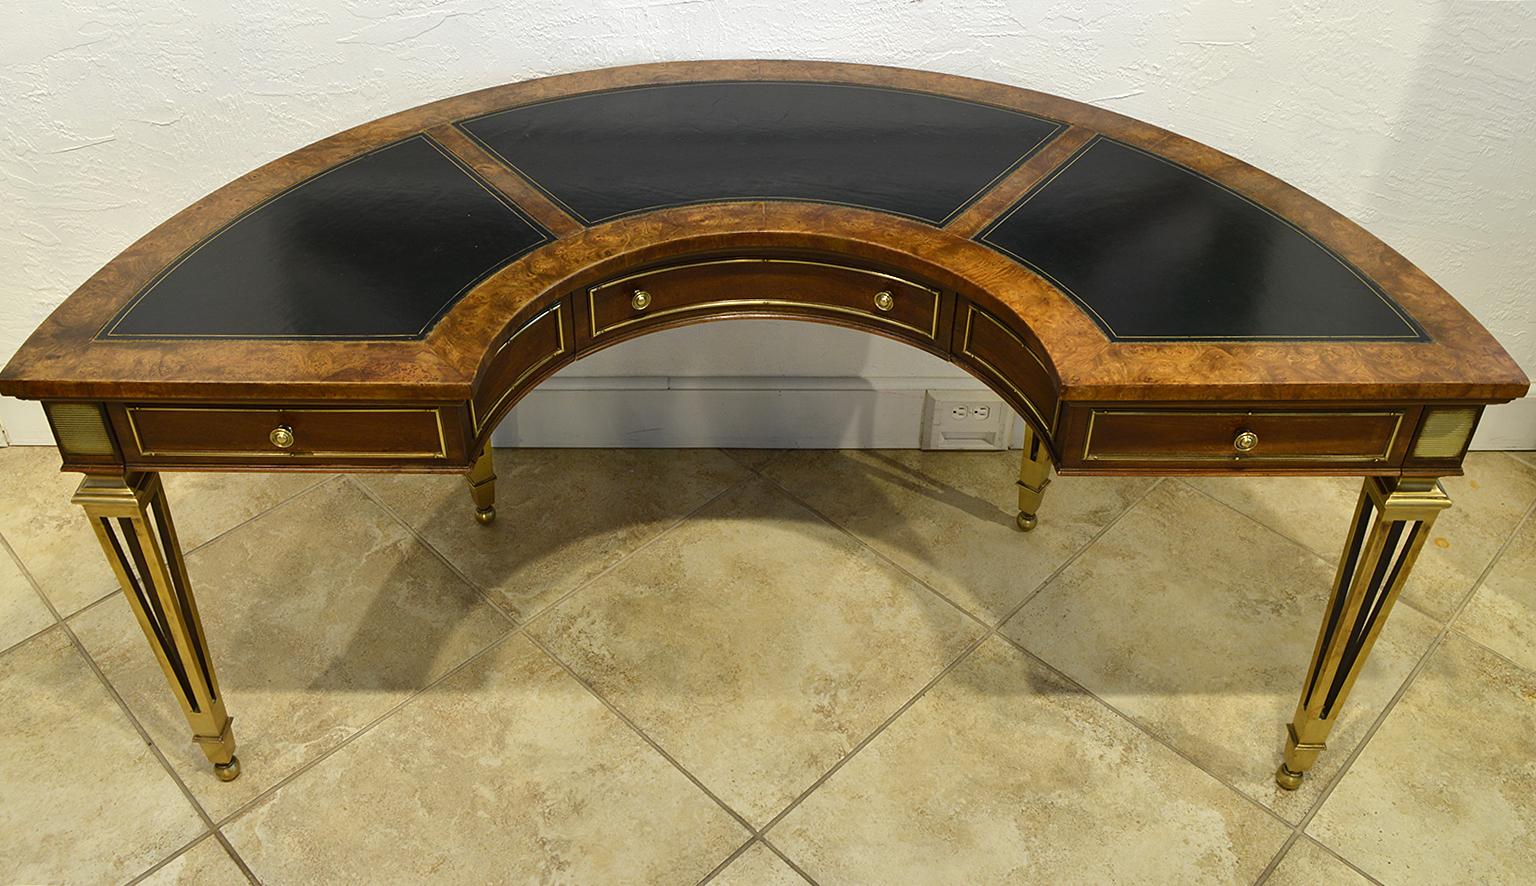 This magnificent Mastercraft semi-circular desk features a top inlaid with three panels of gilt tooled leather above three brass trimmed drawers and brass trimmed panels on the back. The desk is resting on four elegantly designed tapering brass legs